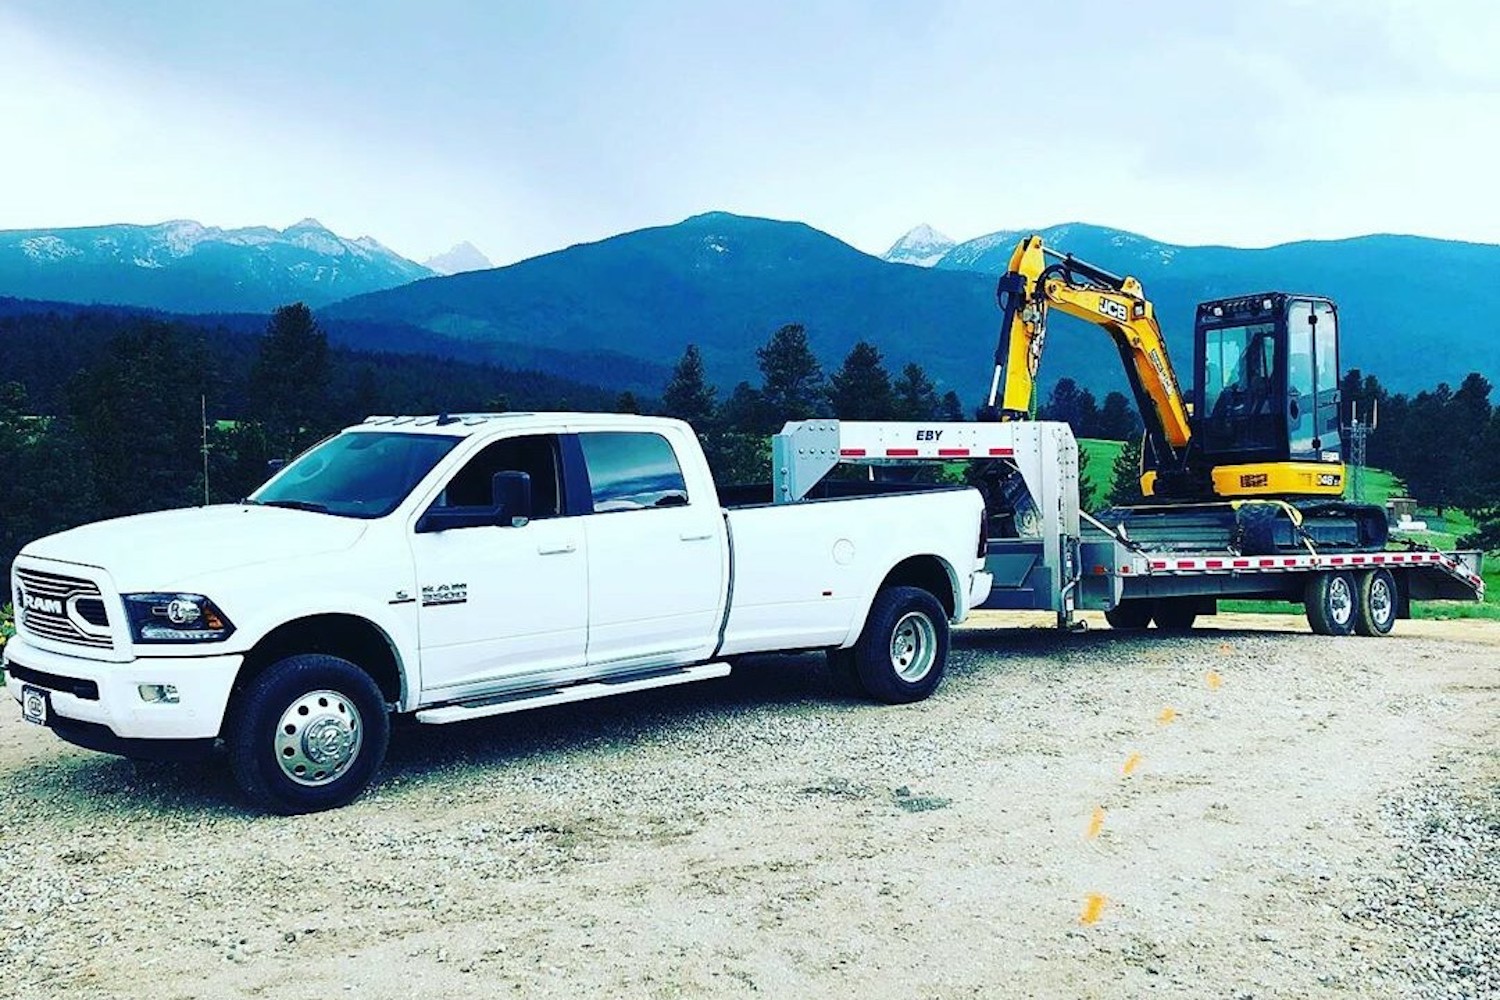 White Ram 3500 heavy-duty double pickup truck pulling an excavator on a flatbed gooseneck trailer, with mountains visible in the background.